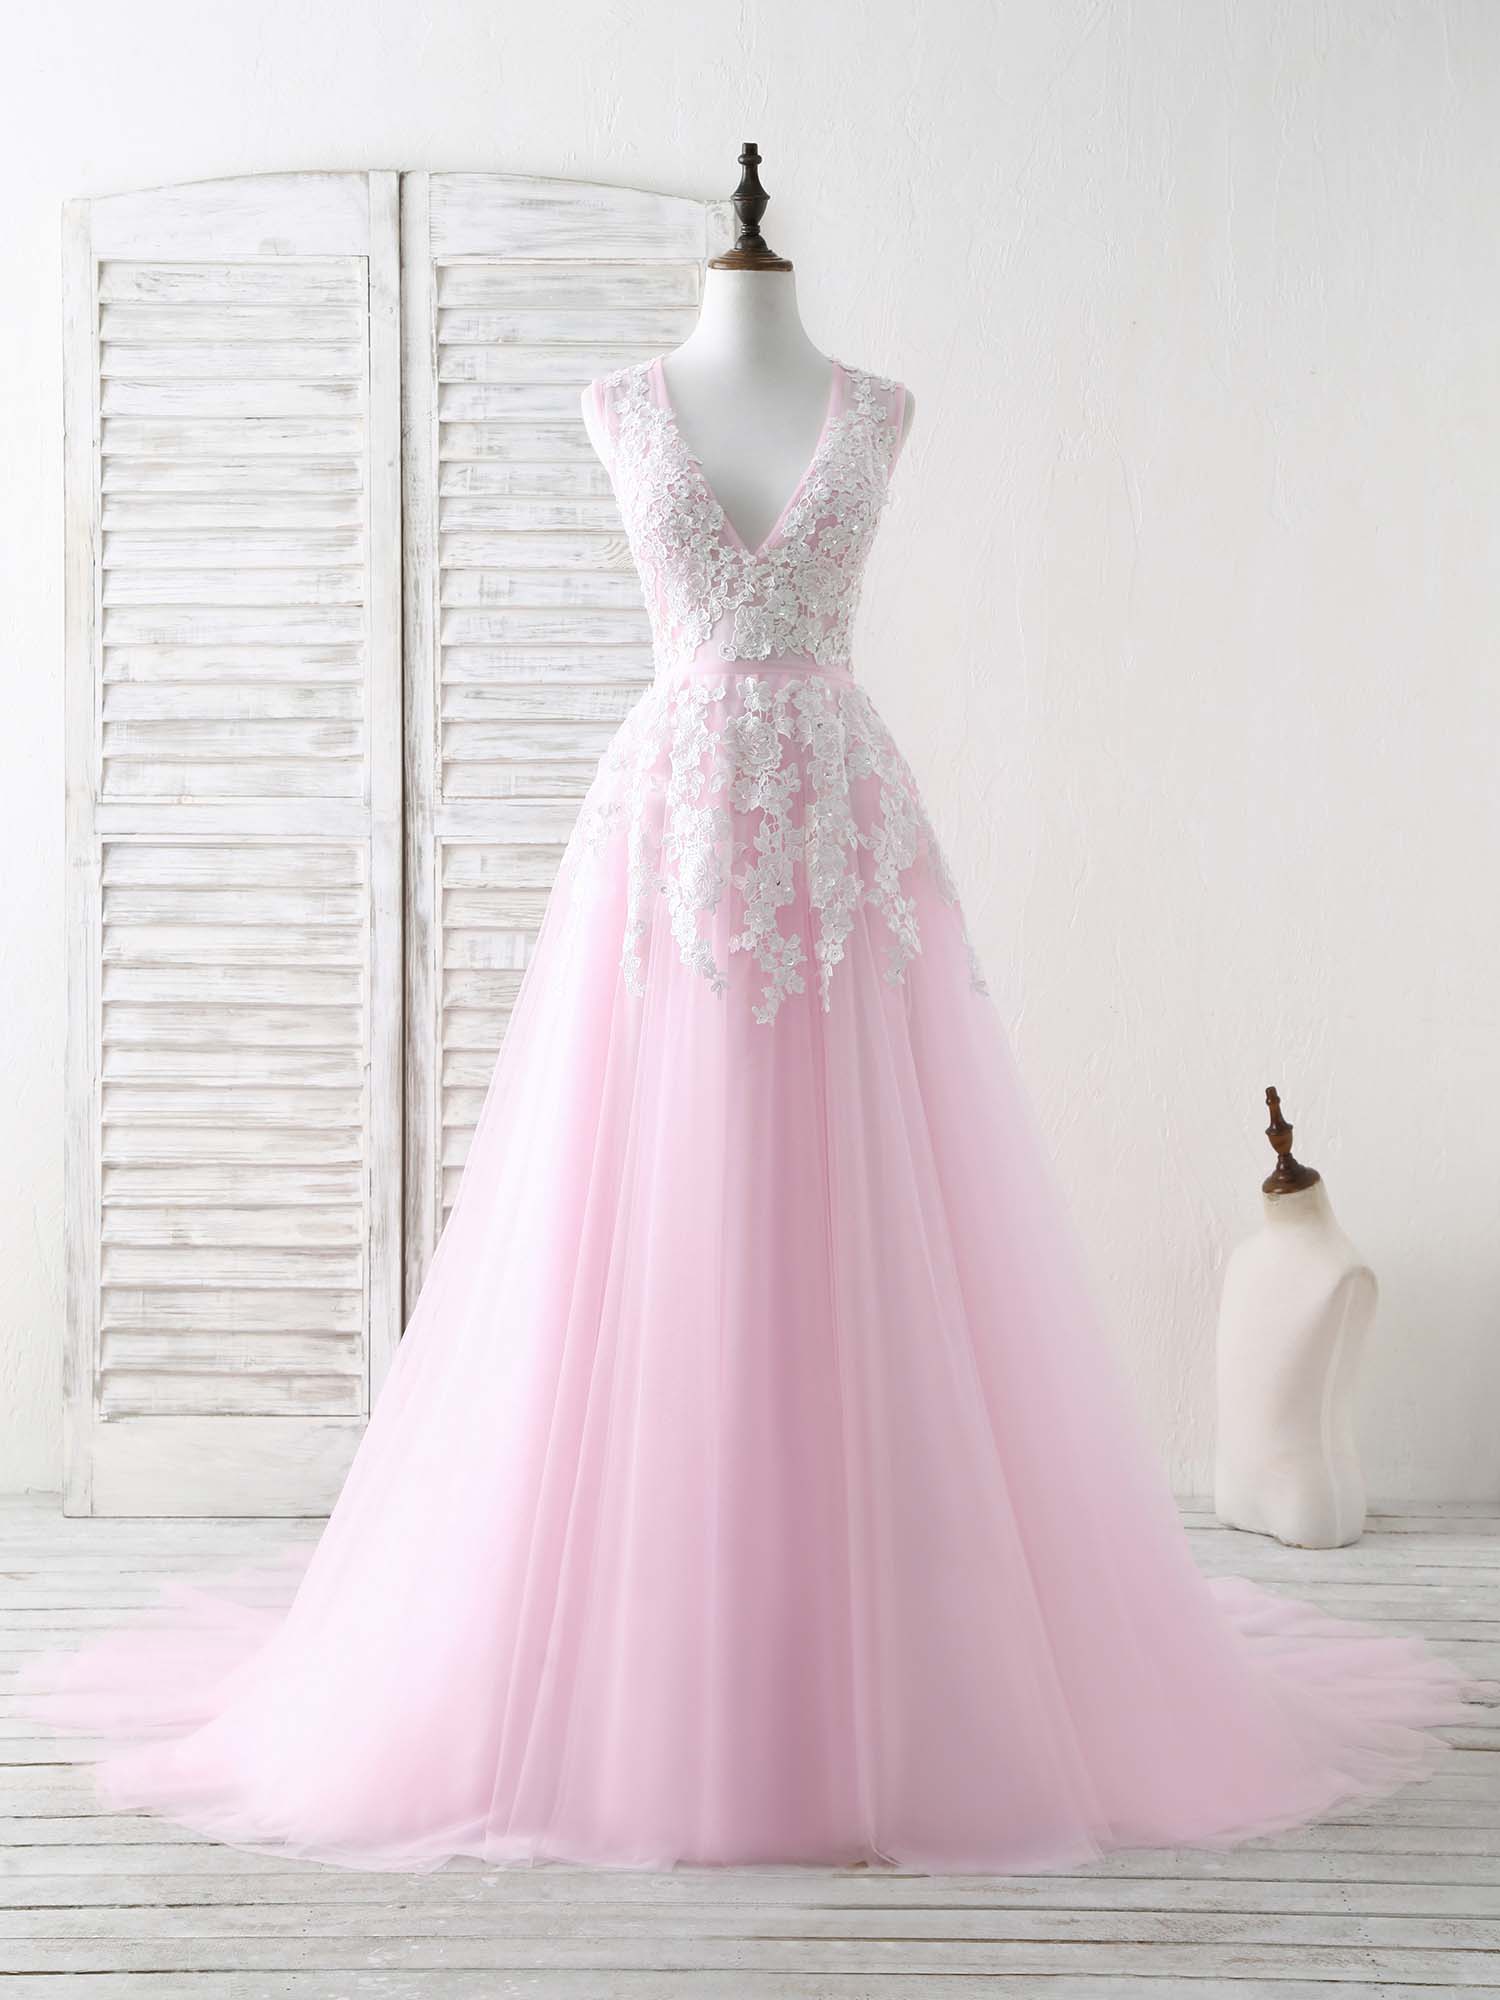 Pink V Neck Tulle Lace Applique Long Corset Prom Dress Pink Evening Dress outfit, Bridesmaid Dress Pink